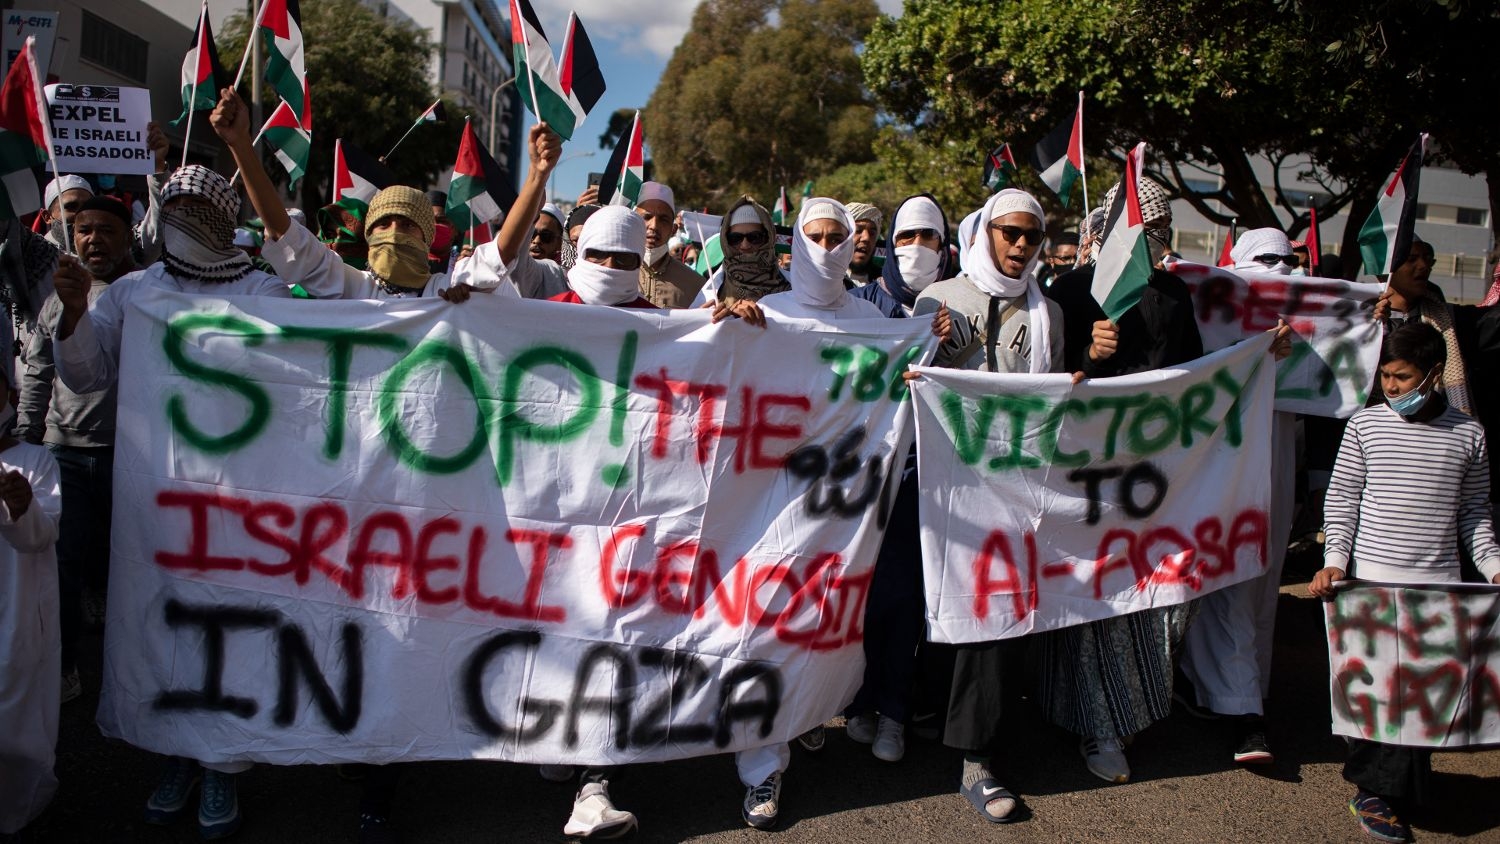 Demonstrators hold banners and Palestinian flags as they march through the city centre in Cape Town, on 12 May 2021 during a protest against Israeli attacks on Palestinians in Gaza.